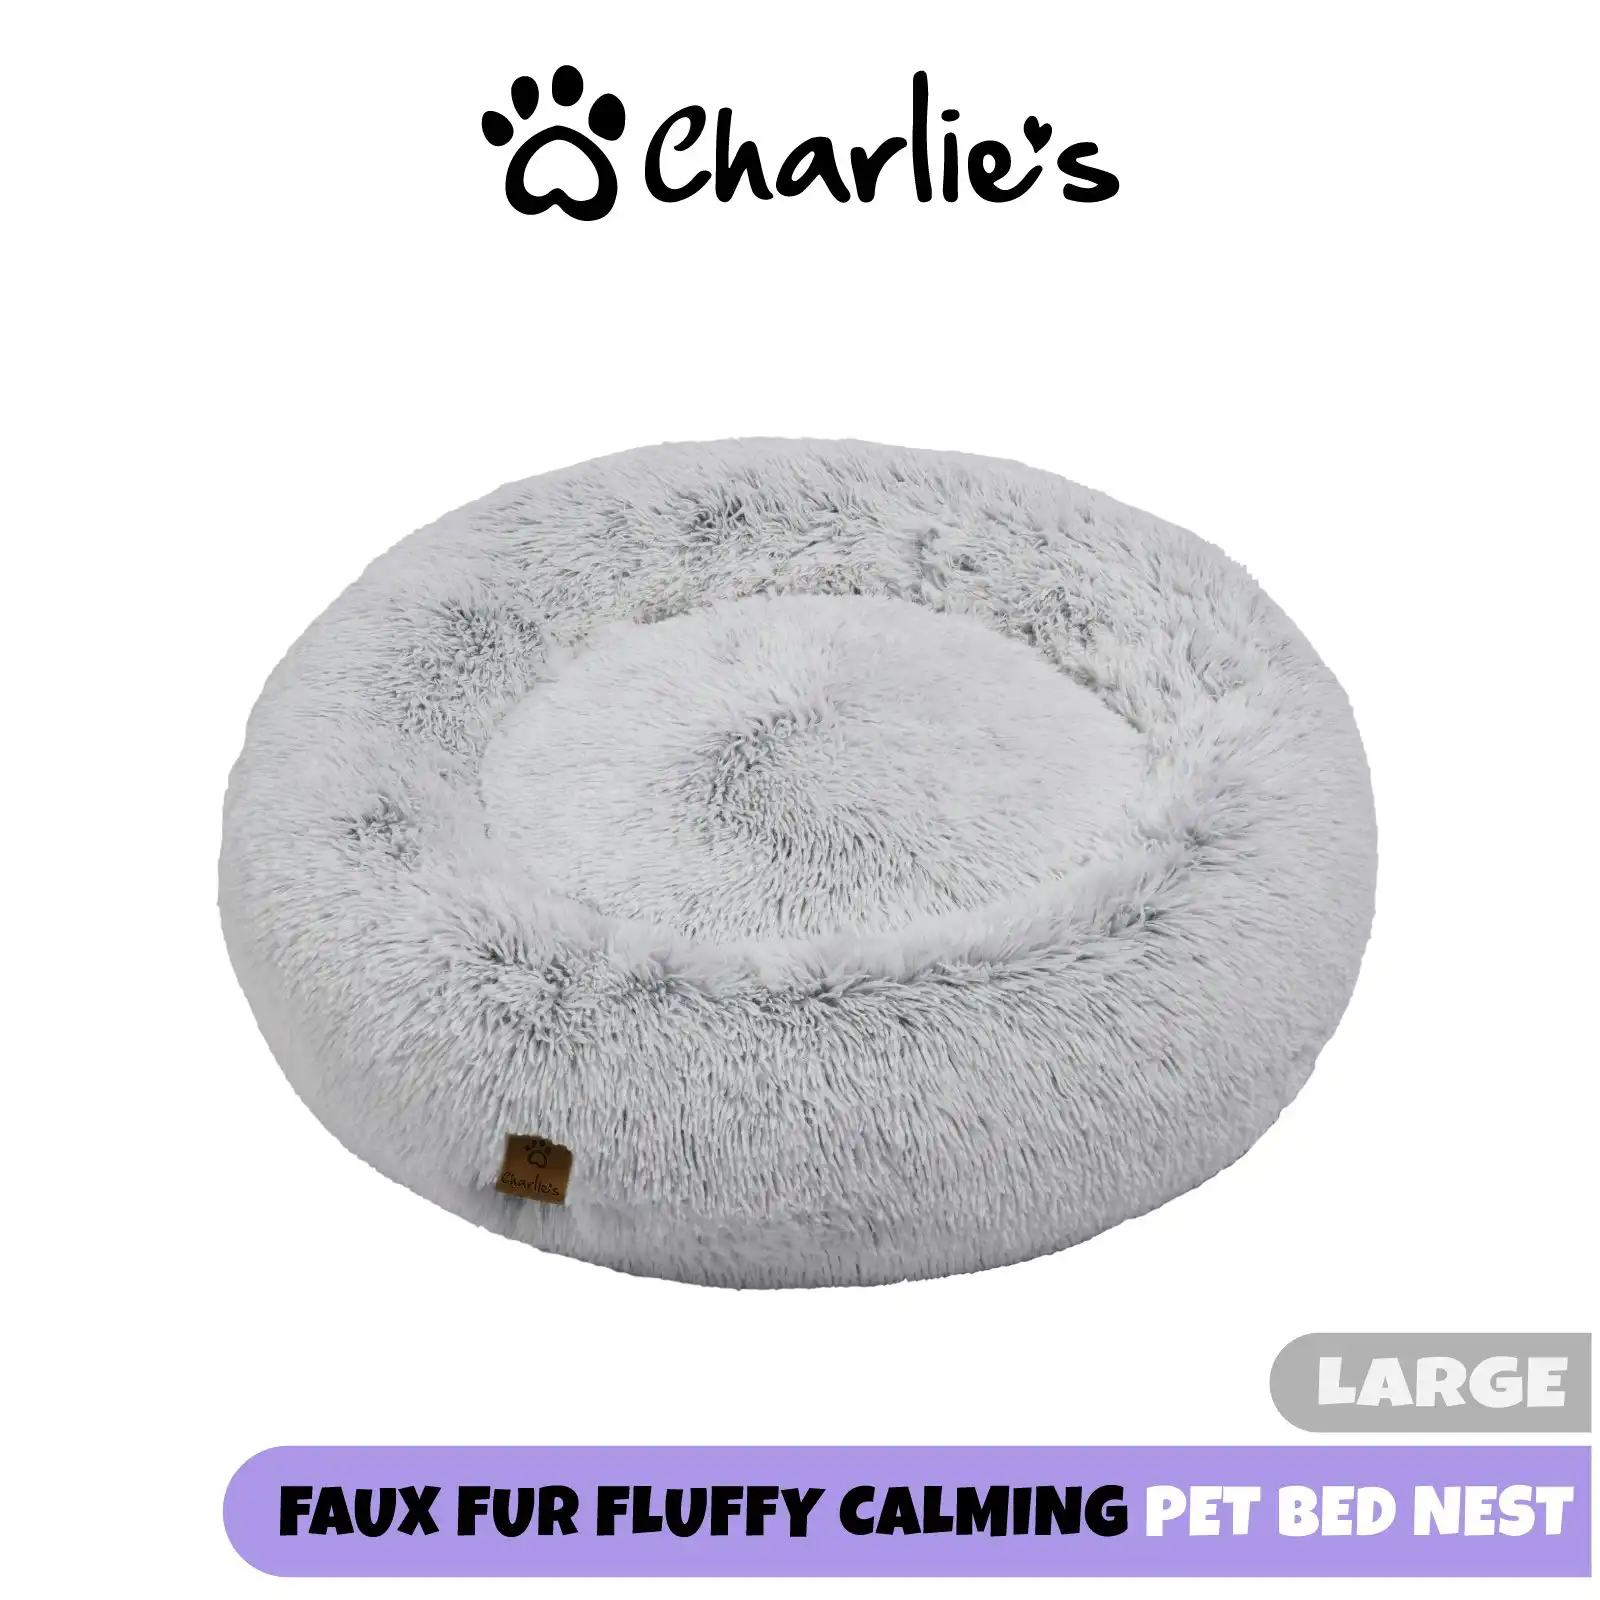 Charlie's Shaggy Faux Fur Donut Calming Pet Nest Bed Artic White Chinchilla Large